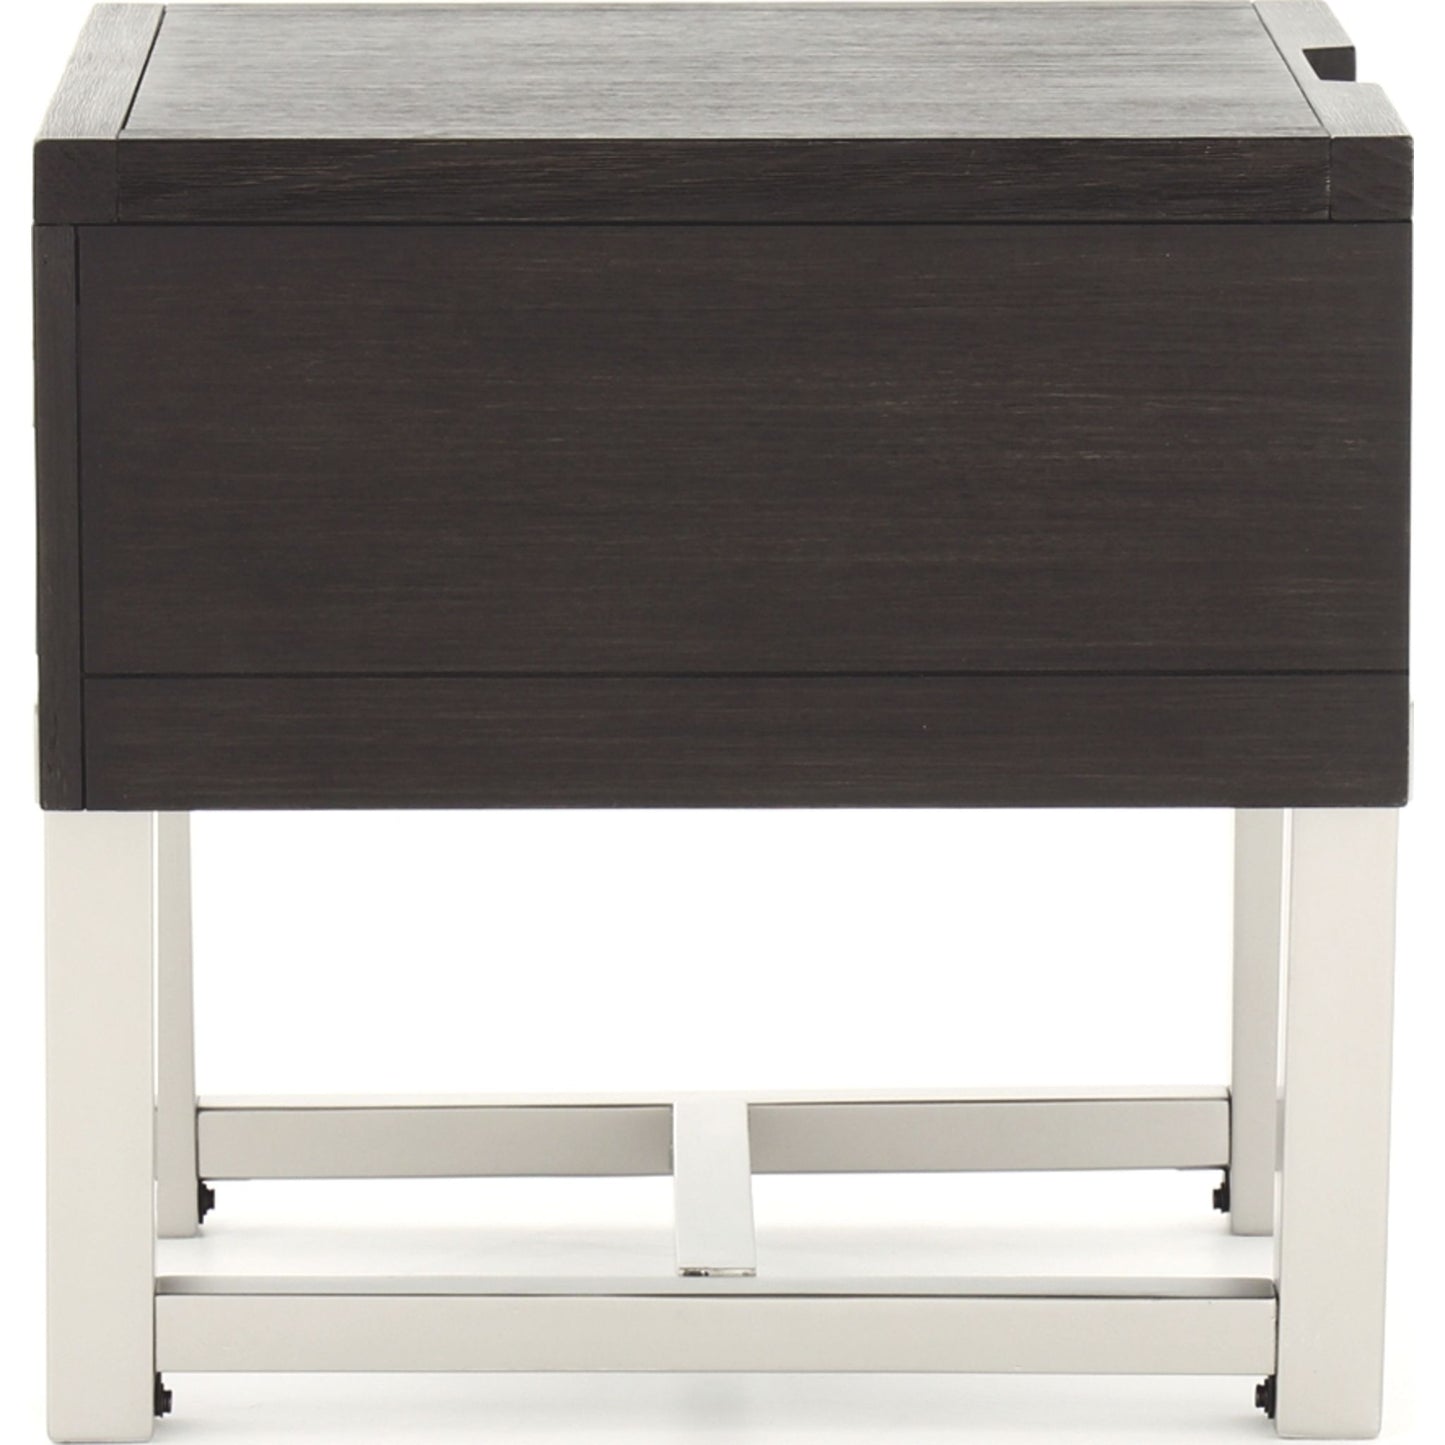 Chisago End Table - Black